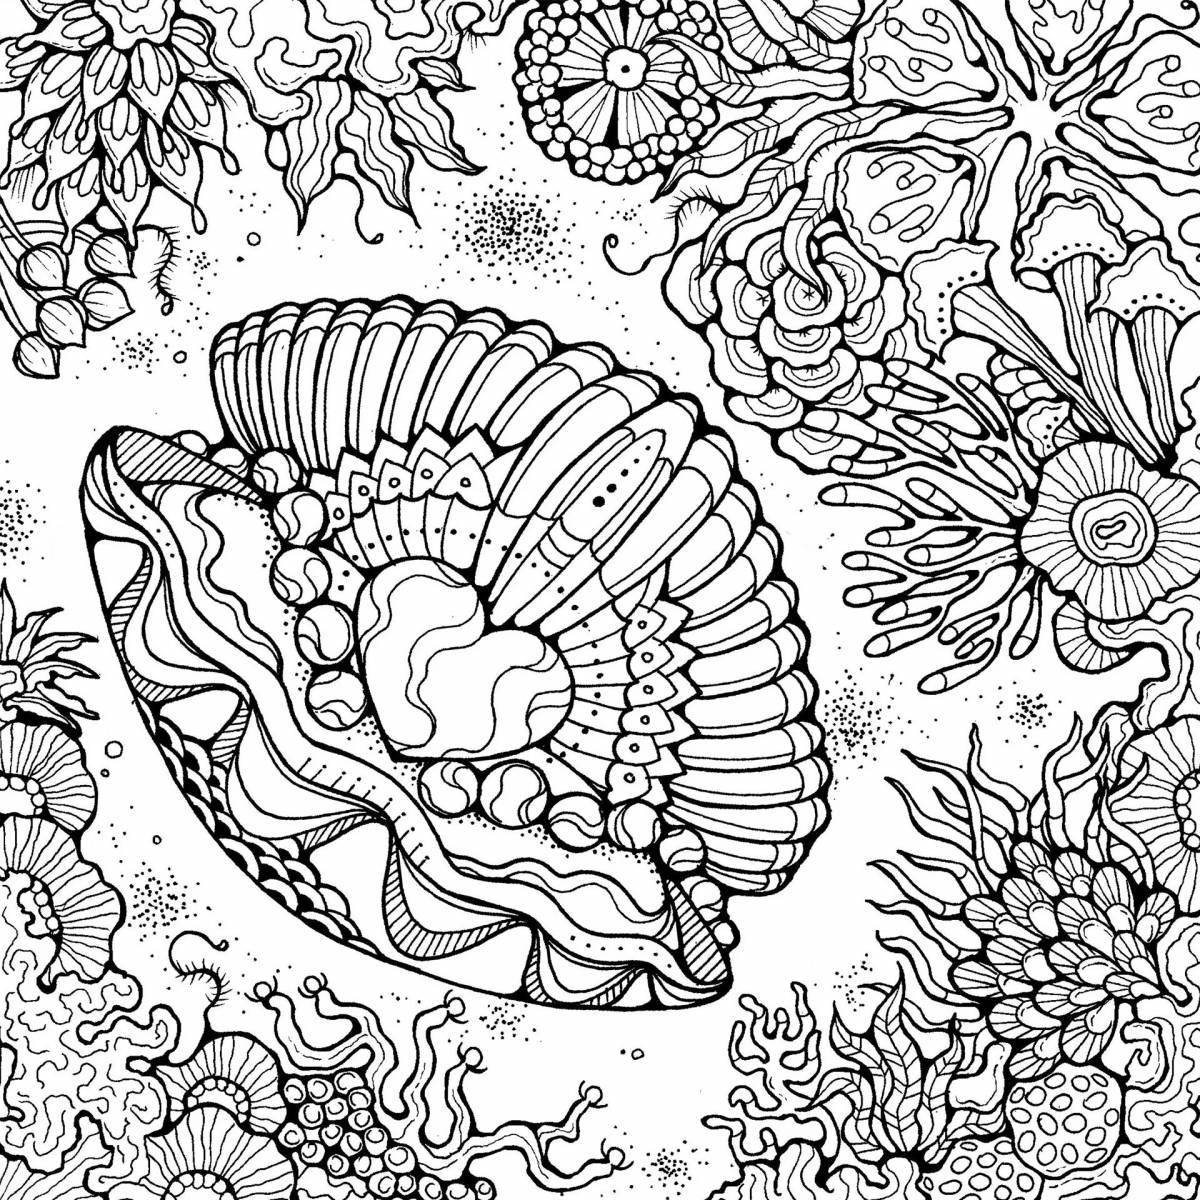 Charming relaxation coloring book